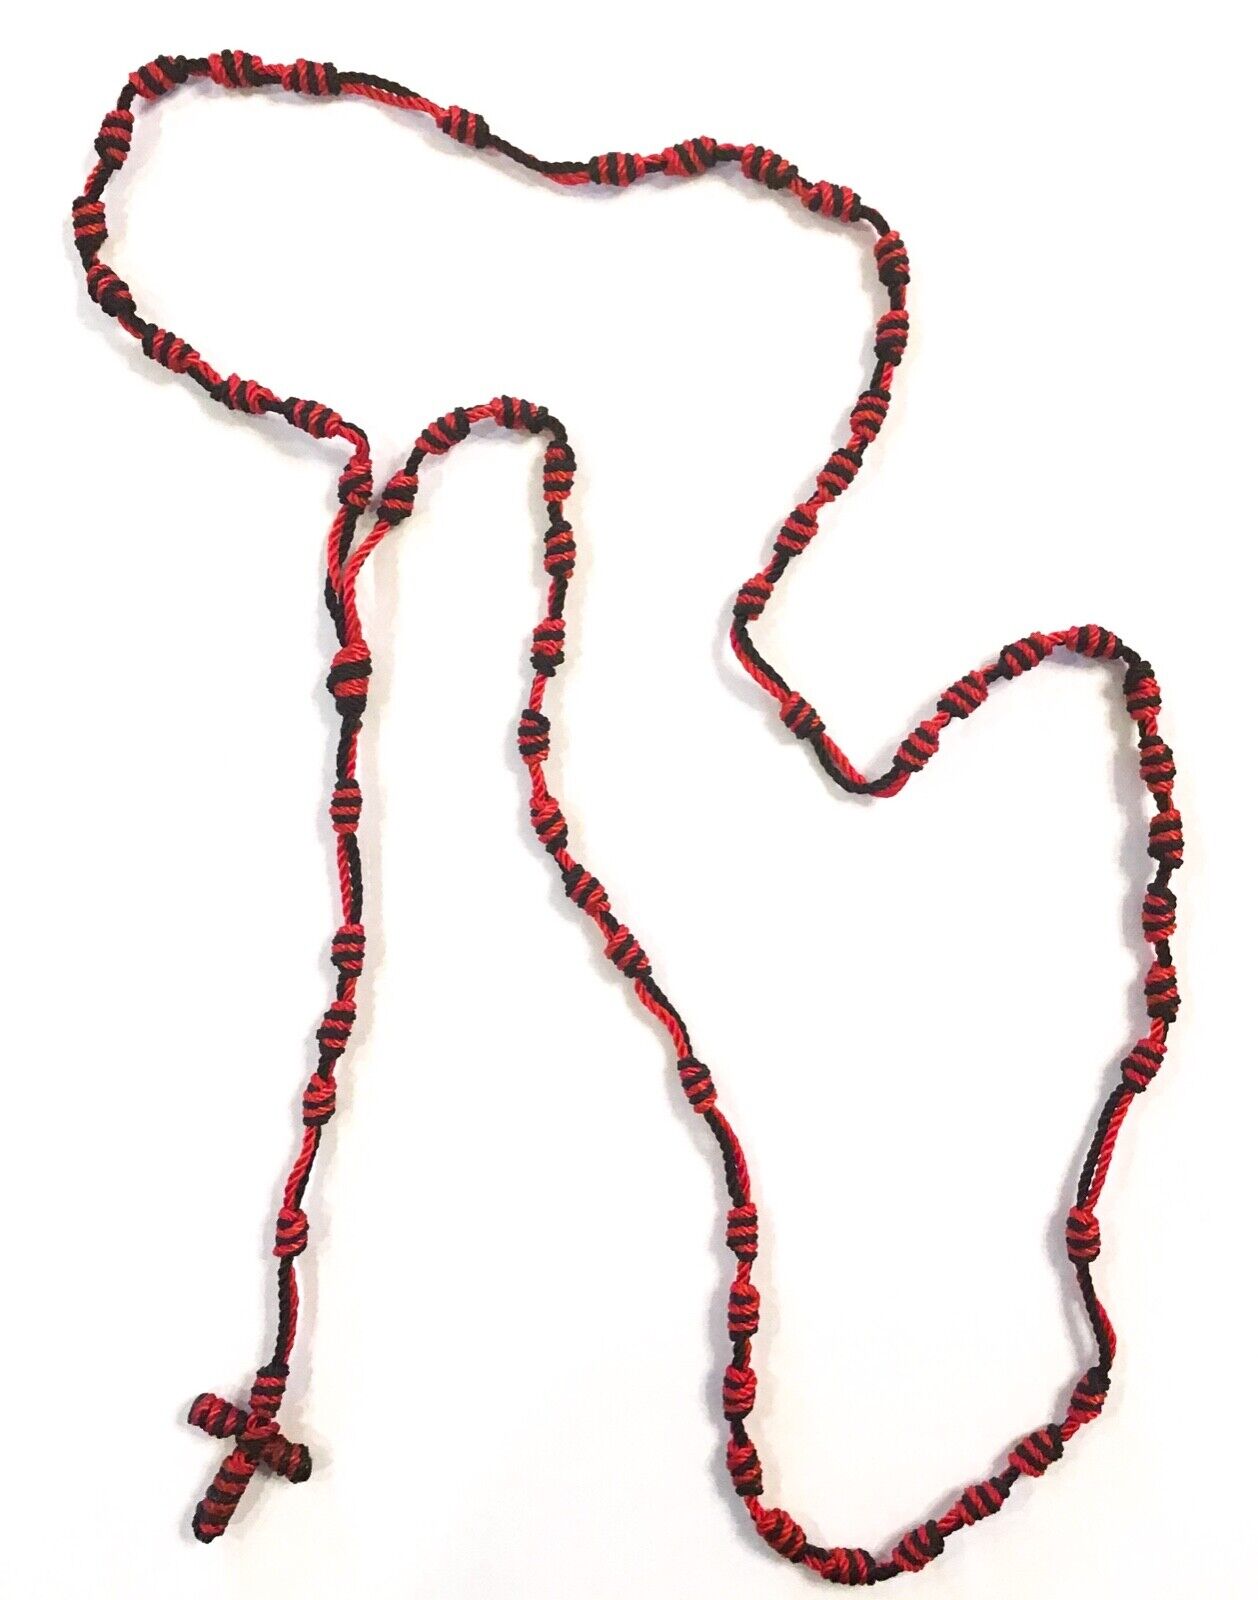 Knotted Rosary - 100% Nylon Thread - Red & Black - Large